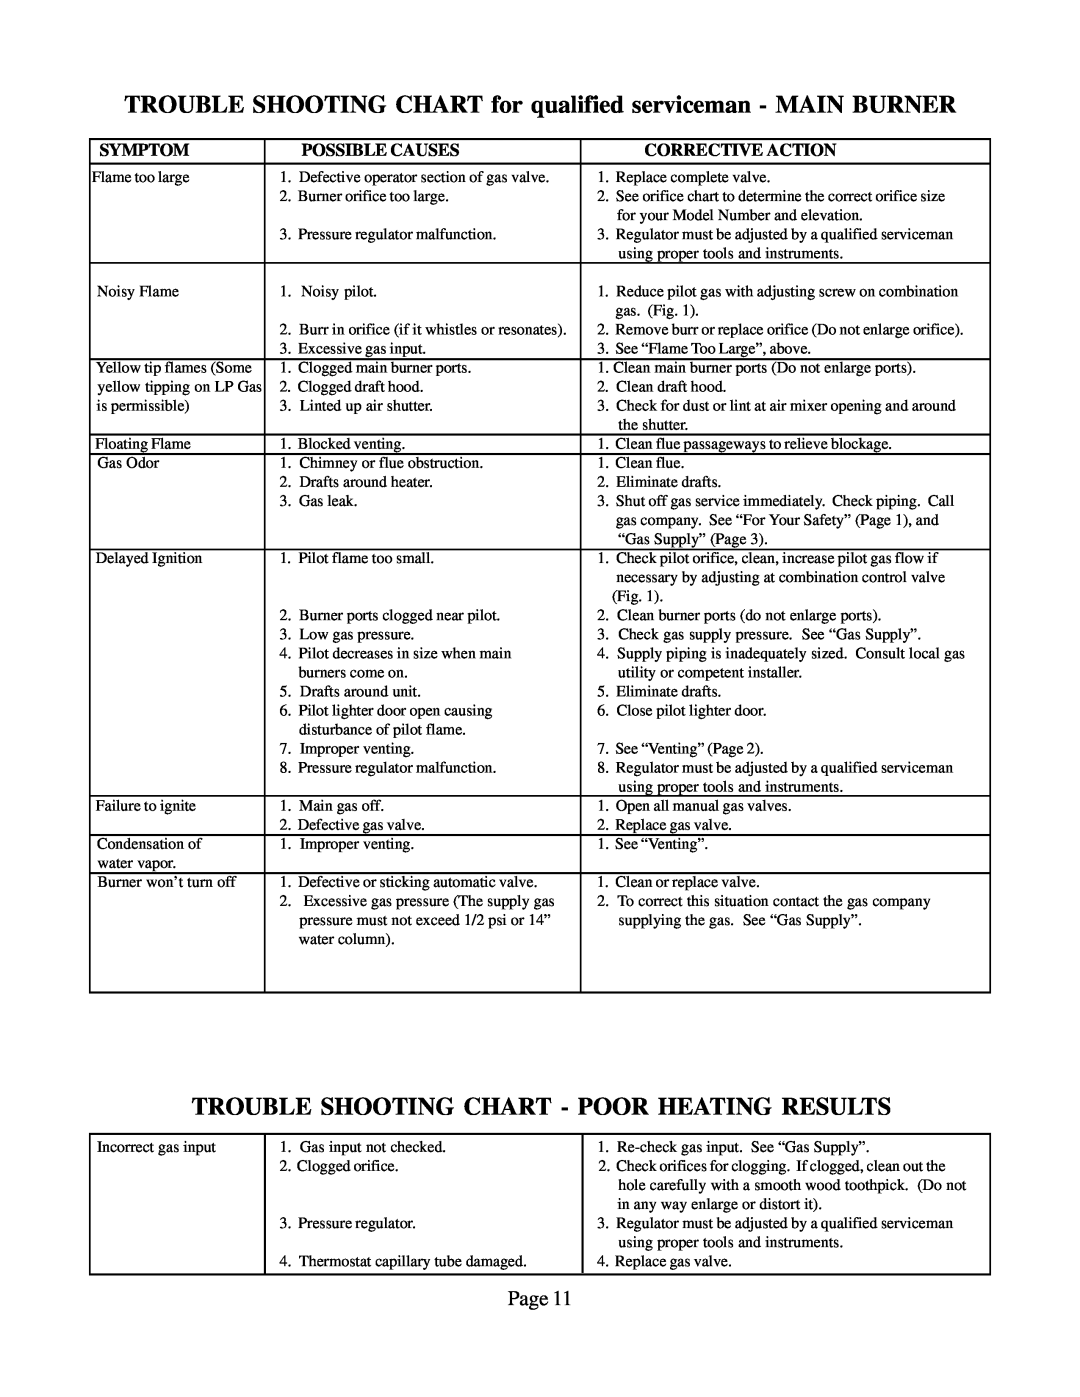 Louisville Tin and Stove VCR501A, VCR502A Trouble Shooting Chart - Poor Heating Results, Page, Symptom, Possible Causes 